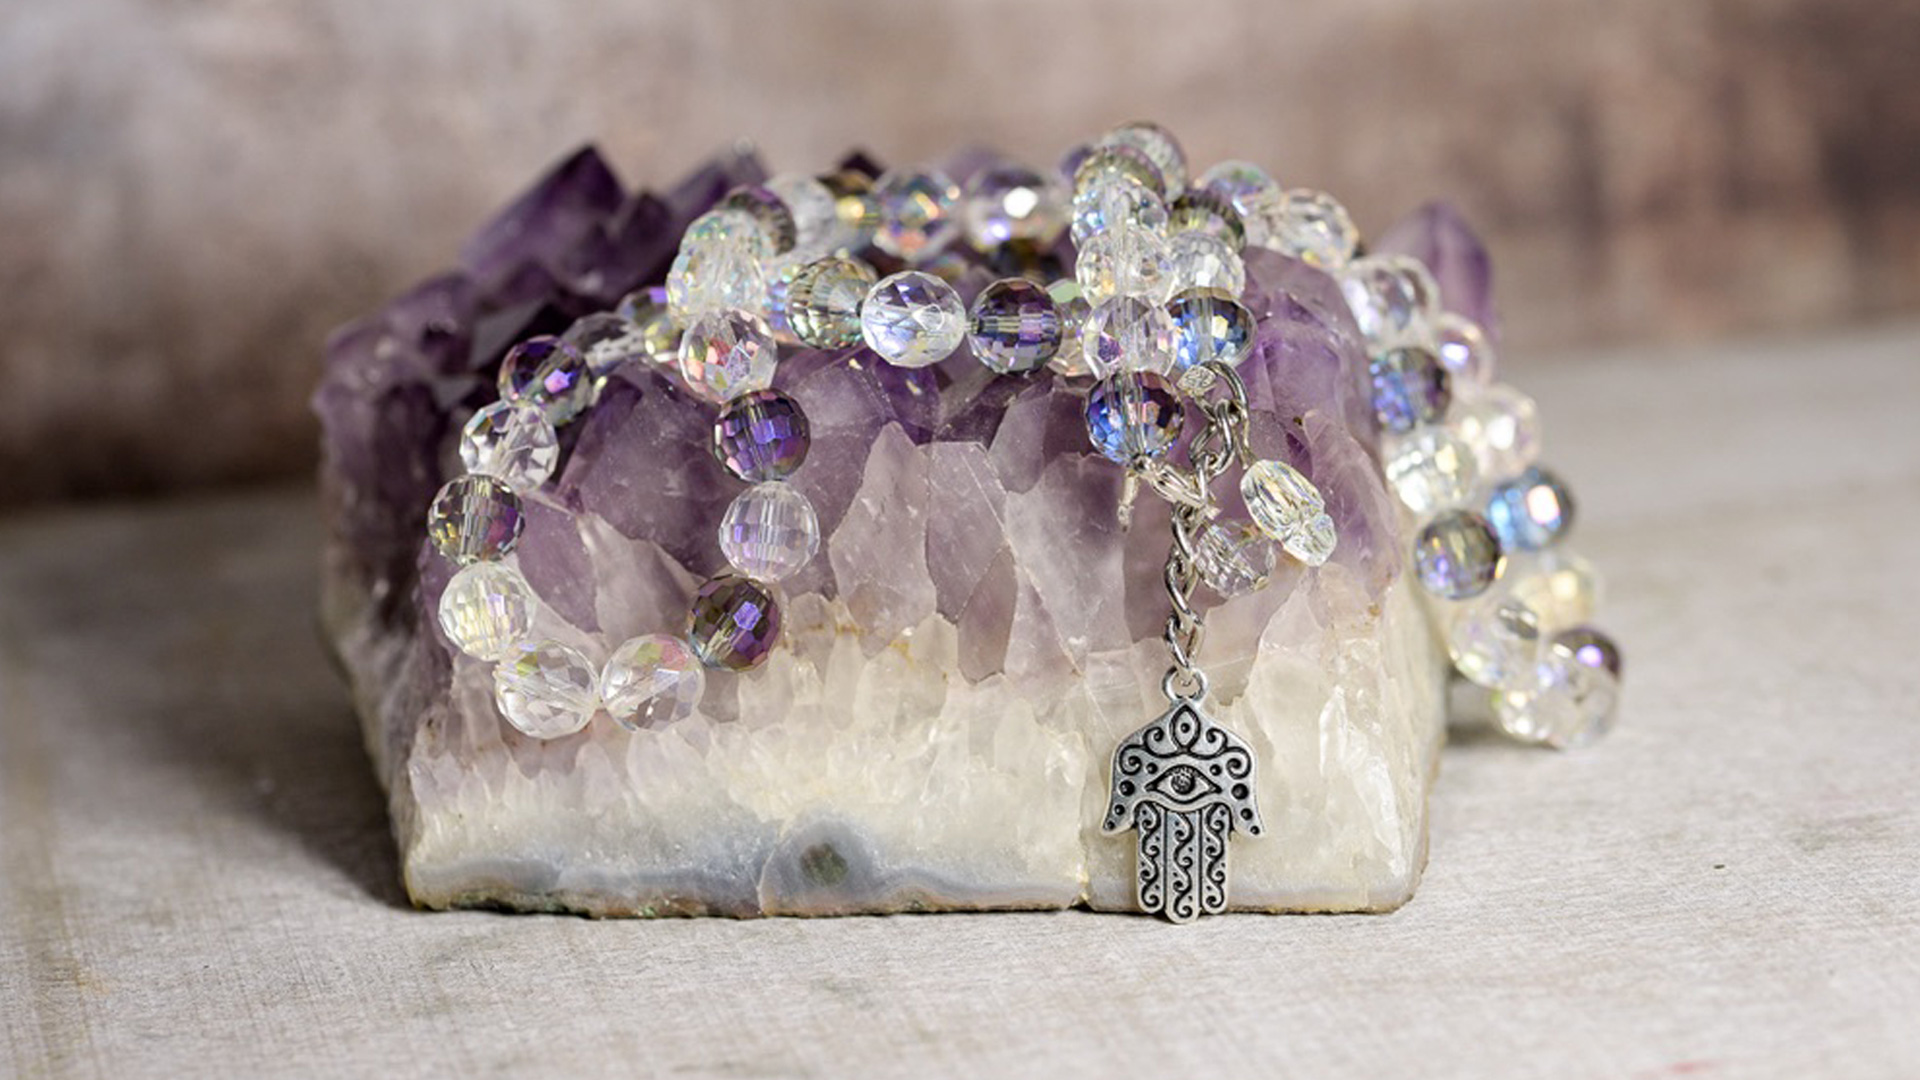 Khamsa BellyBelt with light purple and clear beads and a silver Khamsa pendent on a purple gemstone rock.